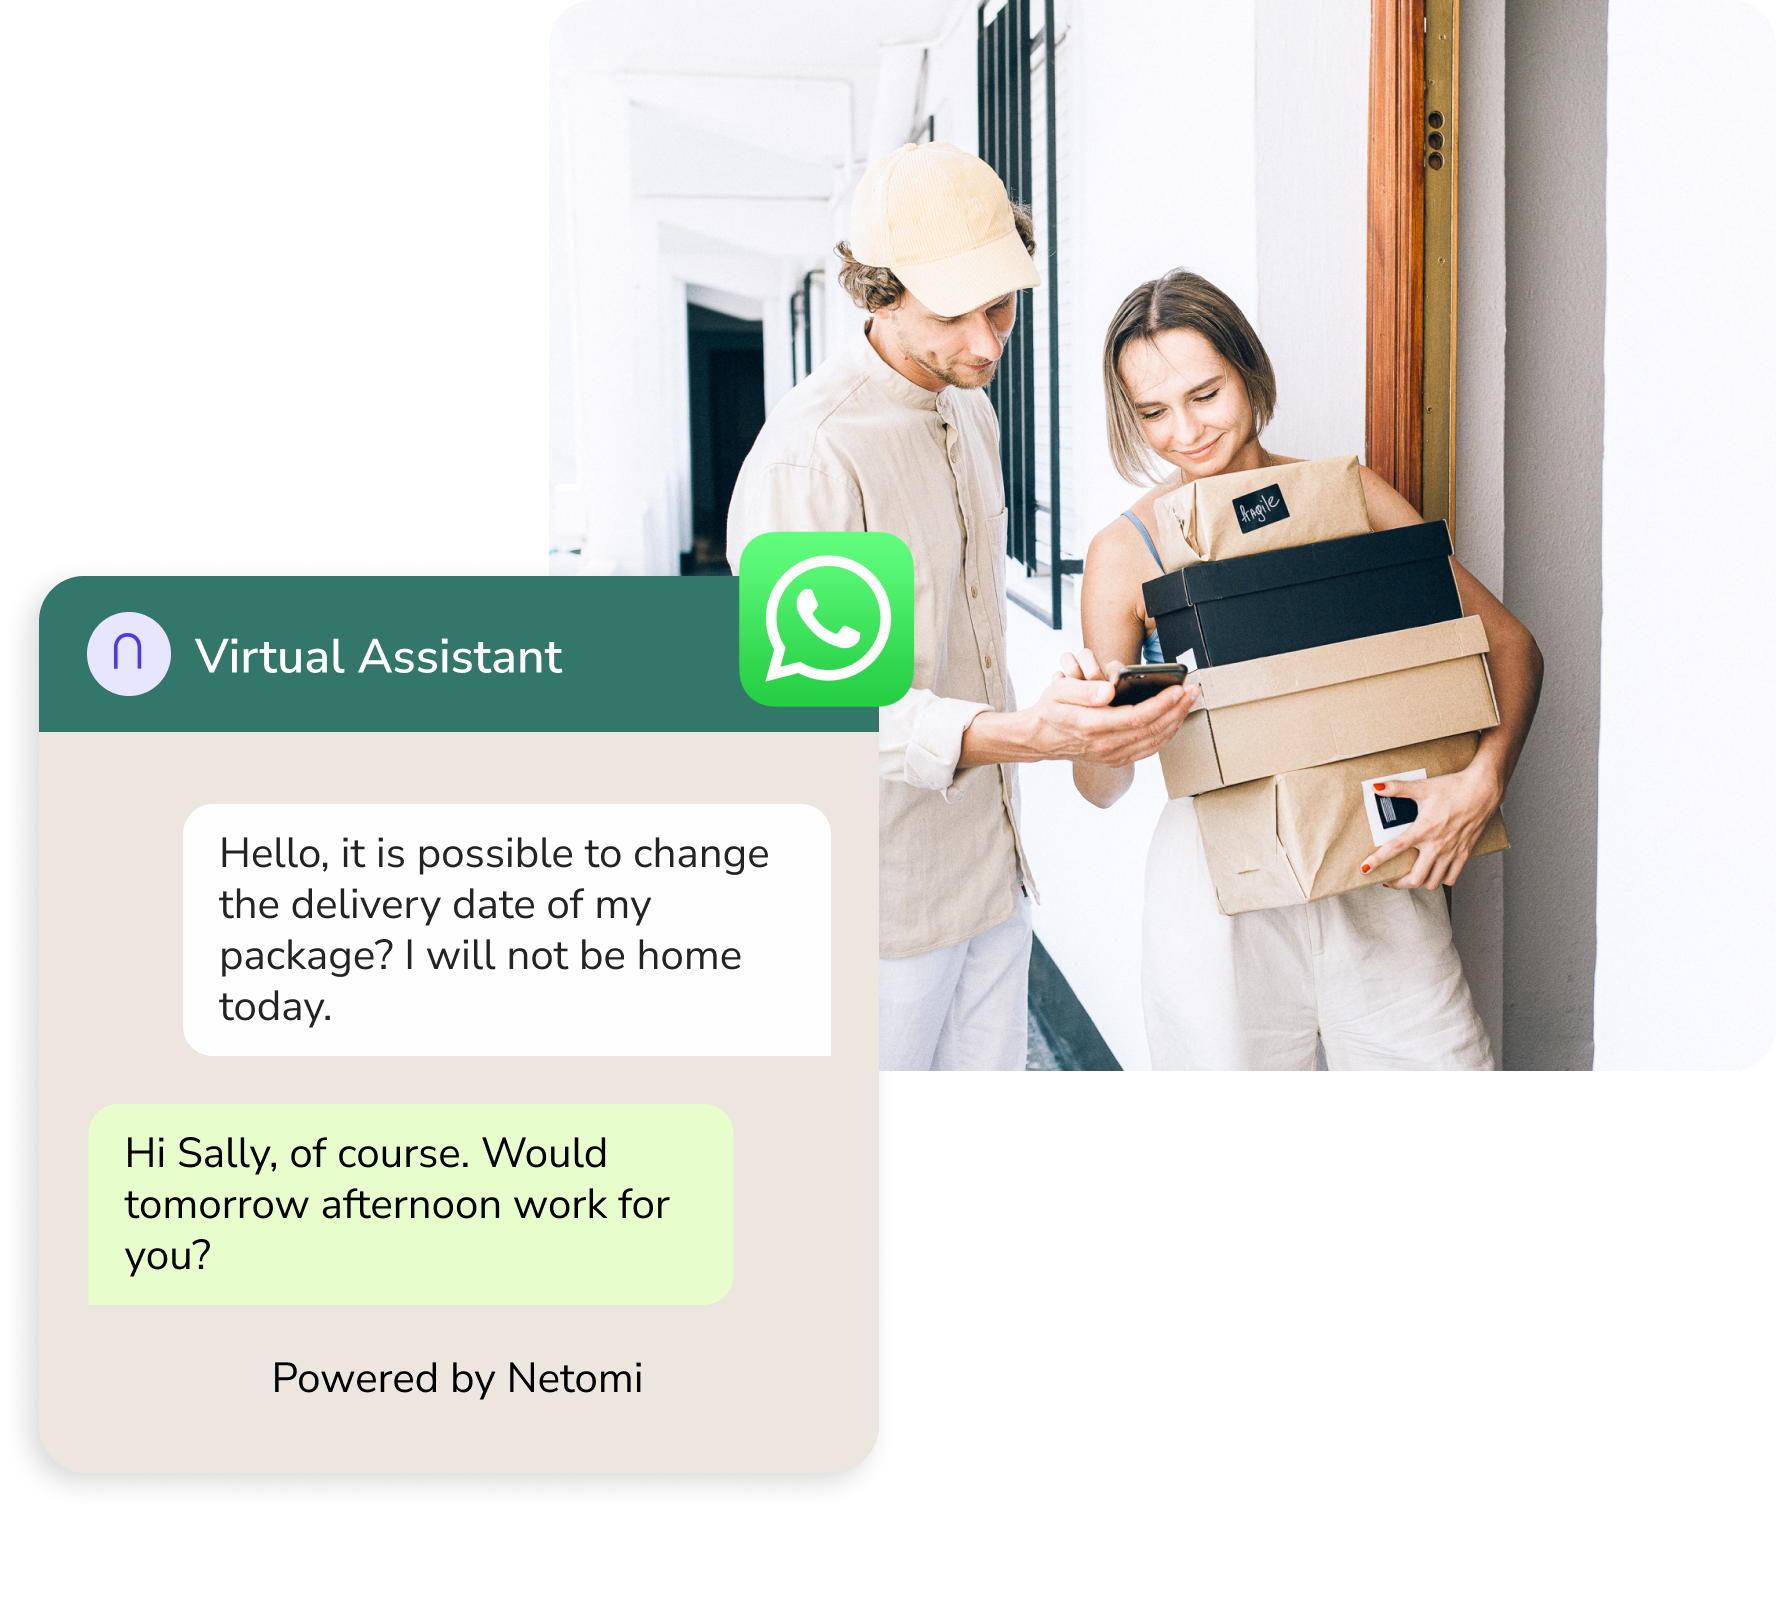 AI Customer Service integrated with messenger platforms